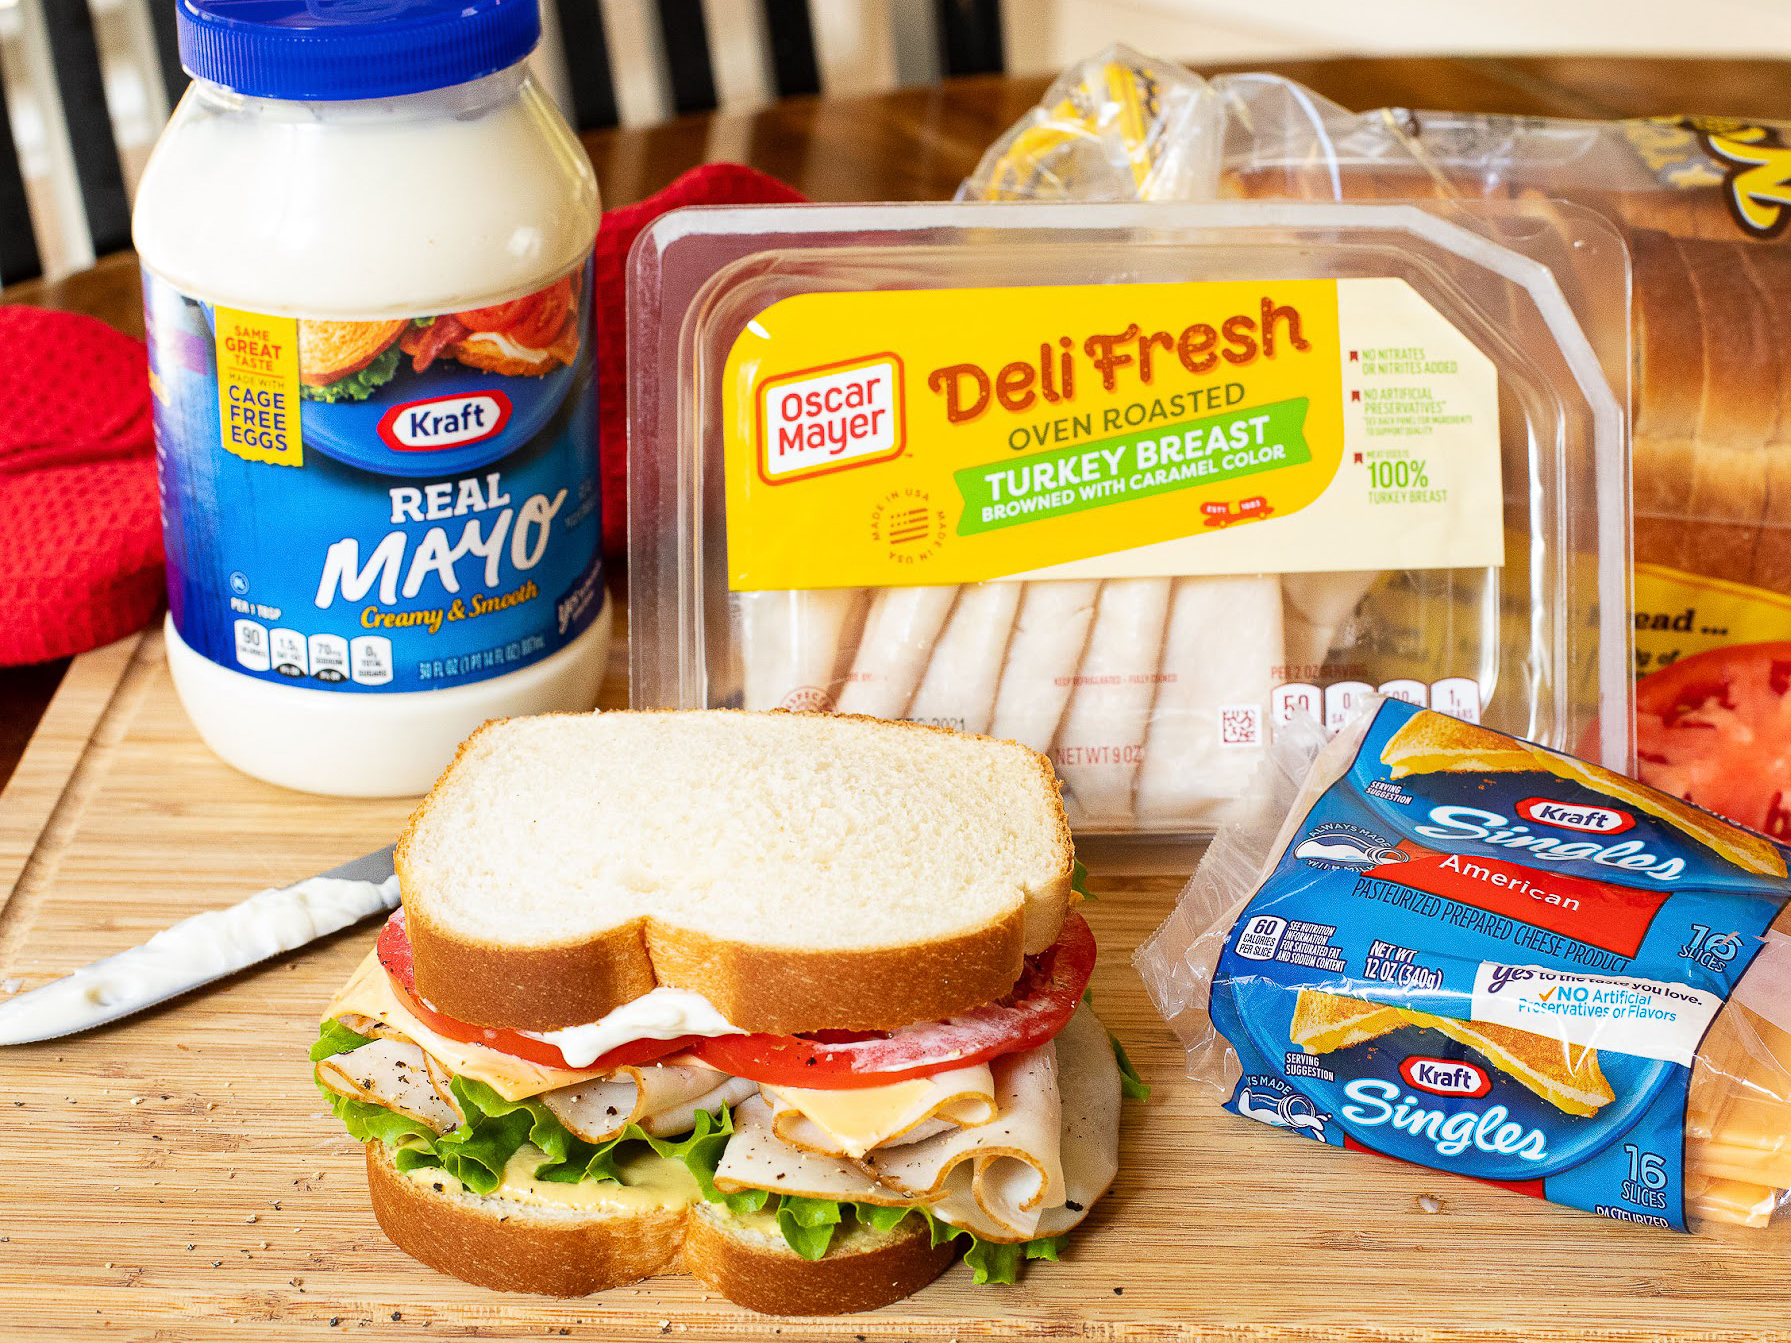 Head Into Publix To Get Everything You Need For A Delicious Sandwich In A Pinch - Save $3 Now! on I Heart Publix 1